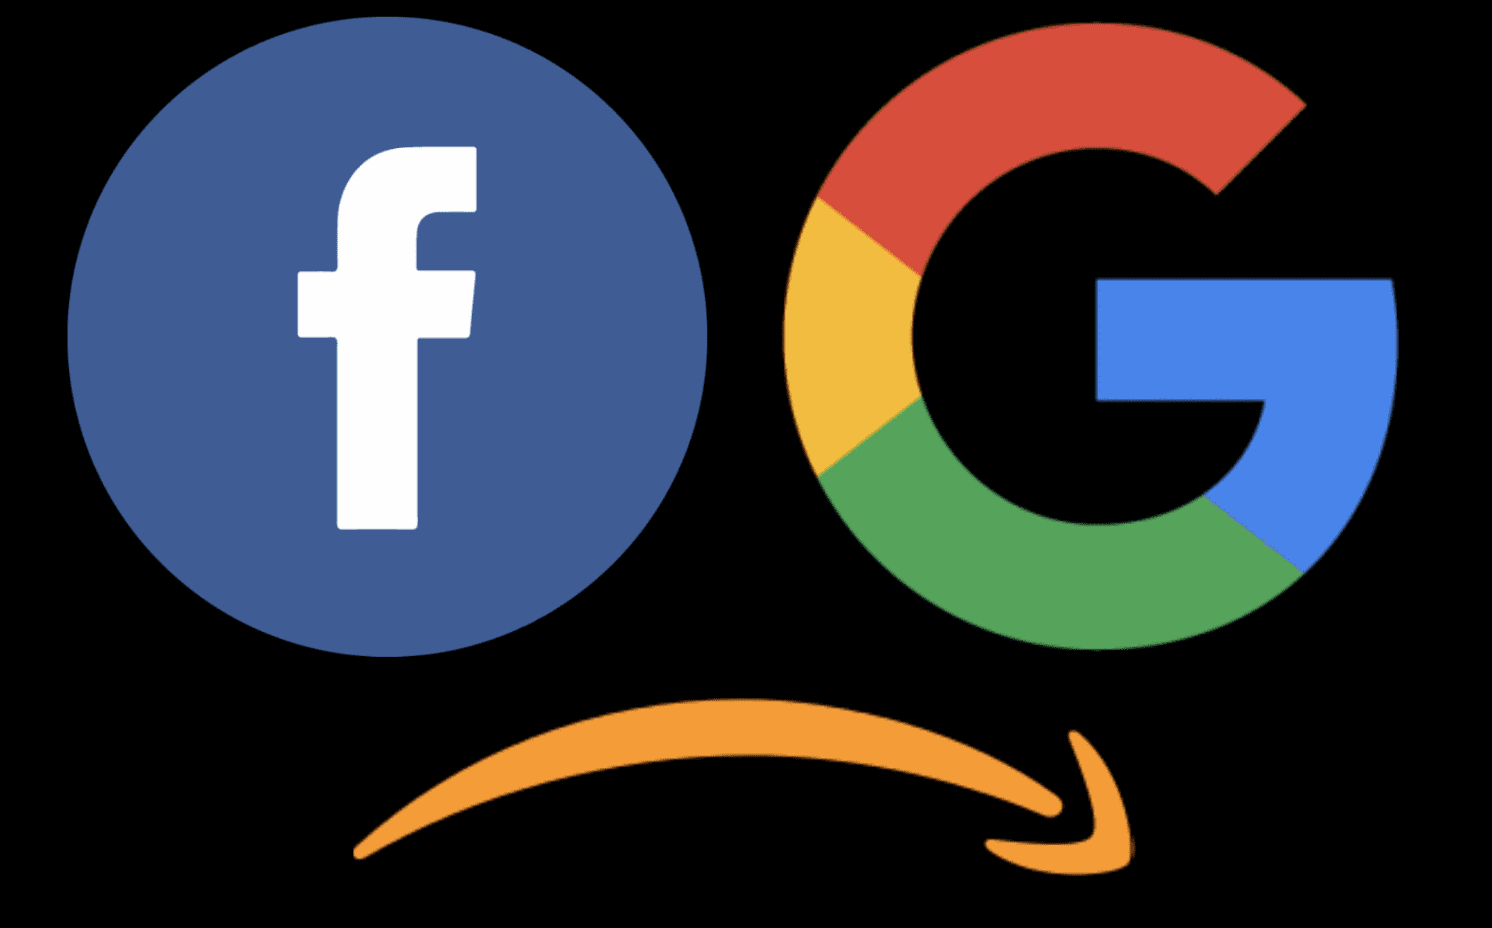 Why Amazon and Facebook Are Catching up to Google